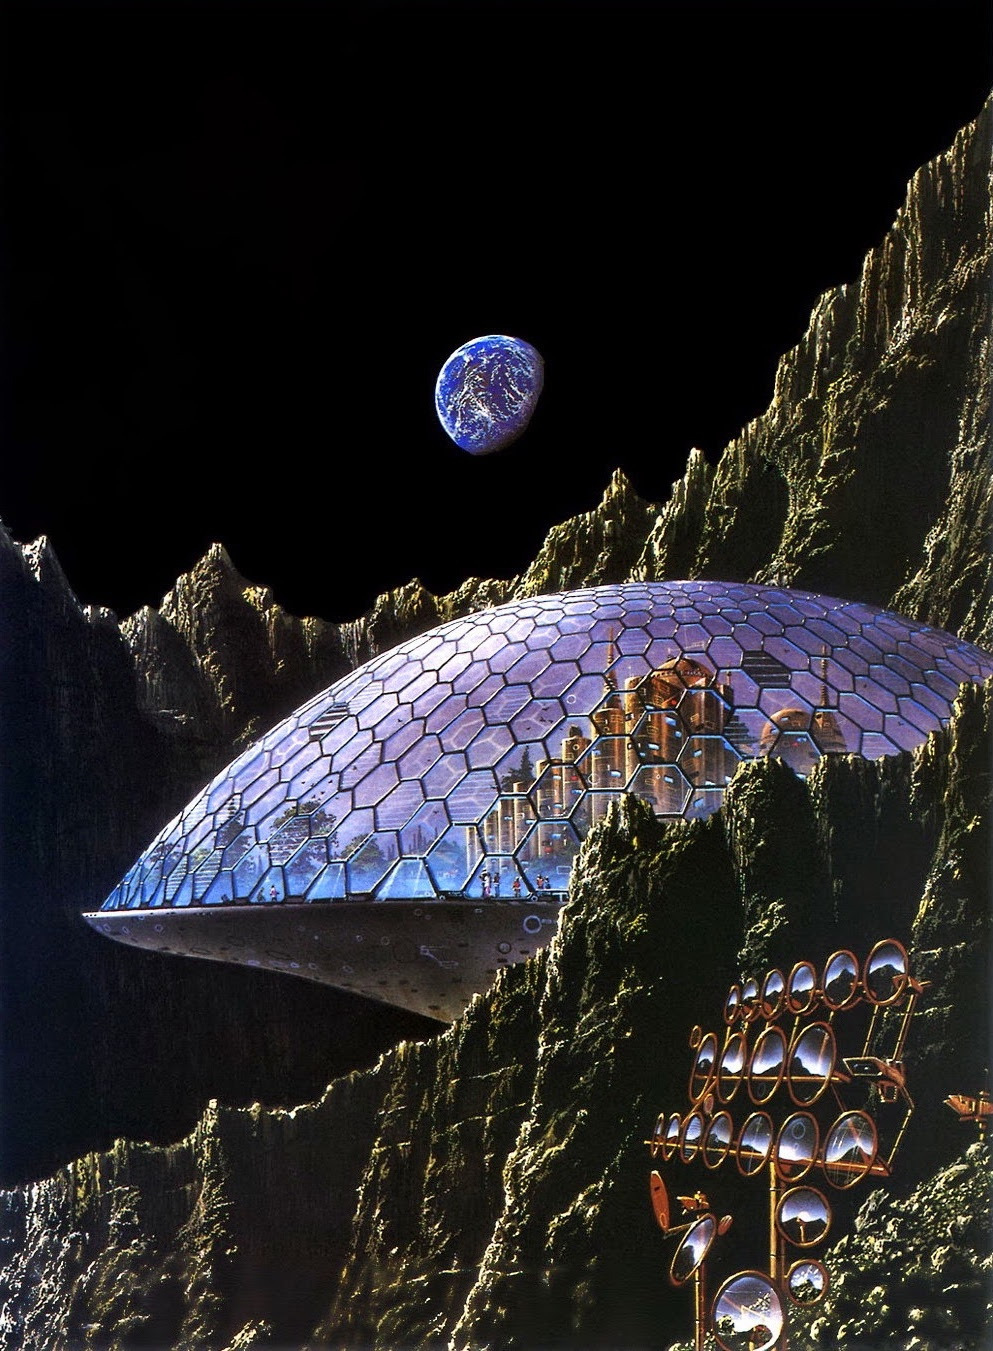 Tim White’s cover art for Assignment in Eternity, Volume One by Robert A. Heinlein, 1977